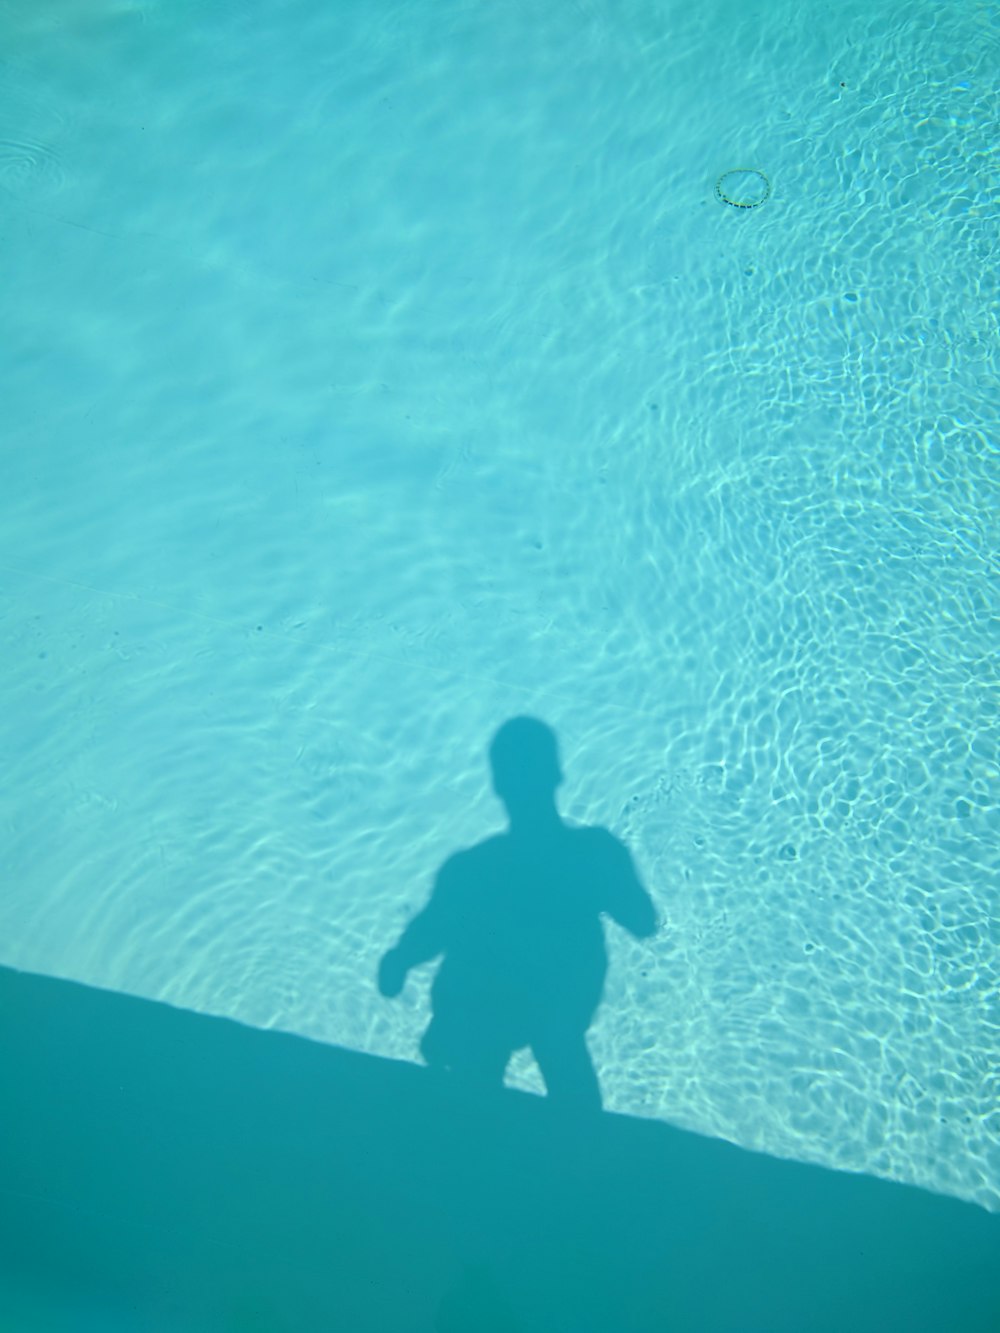 a shadow of a person standing in a pool